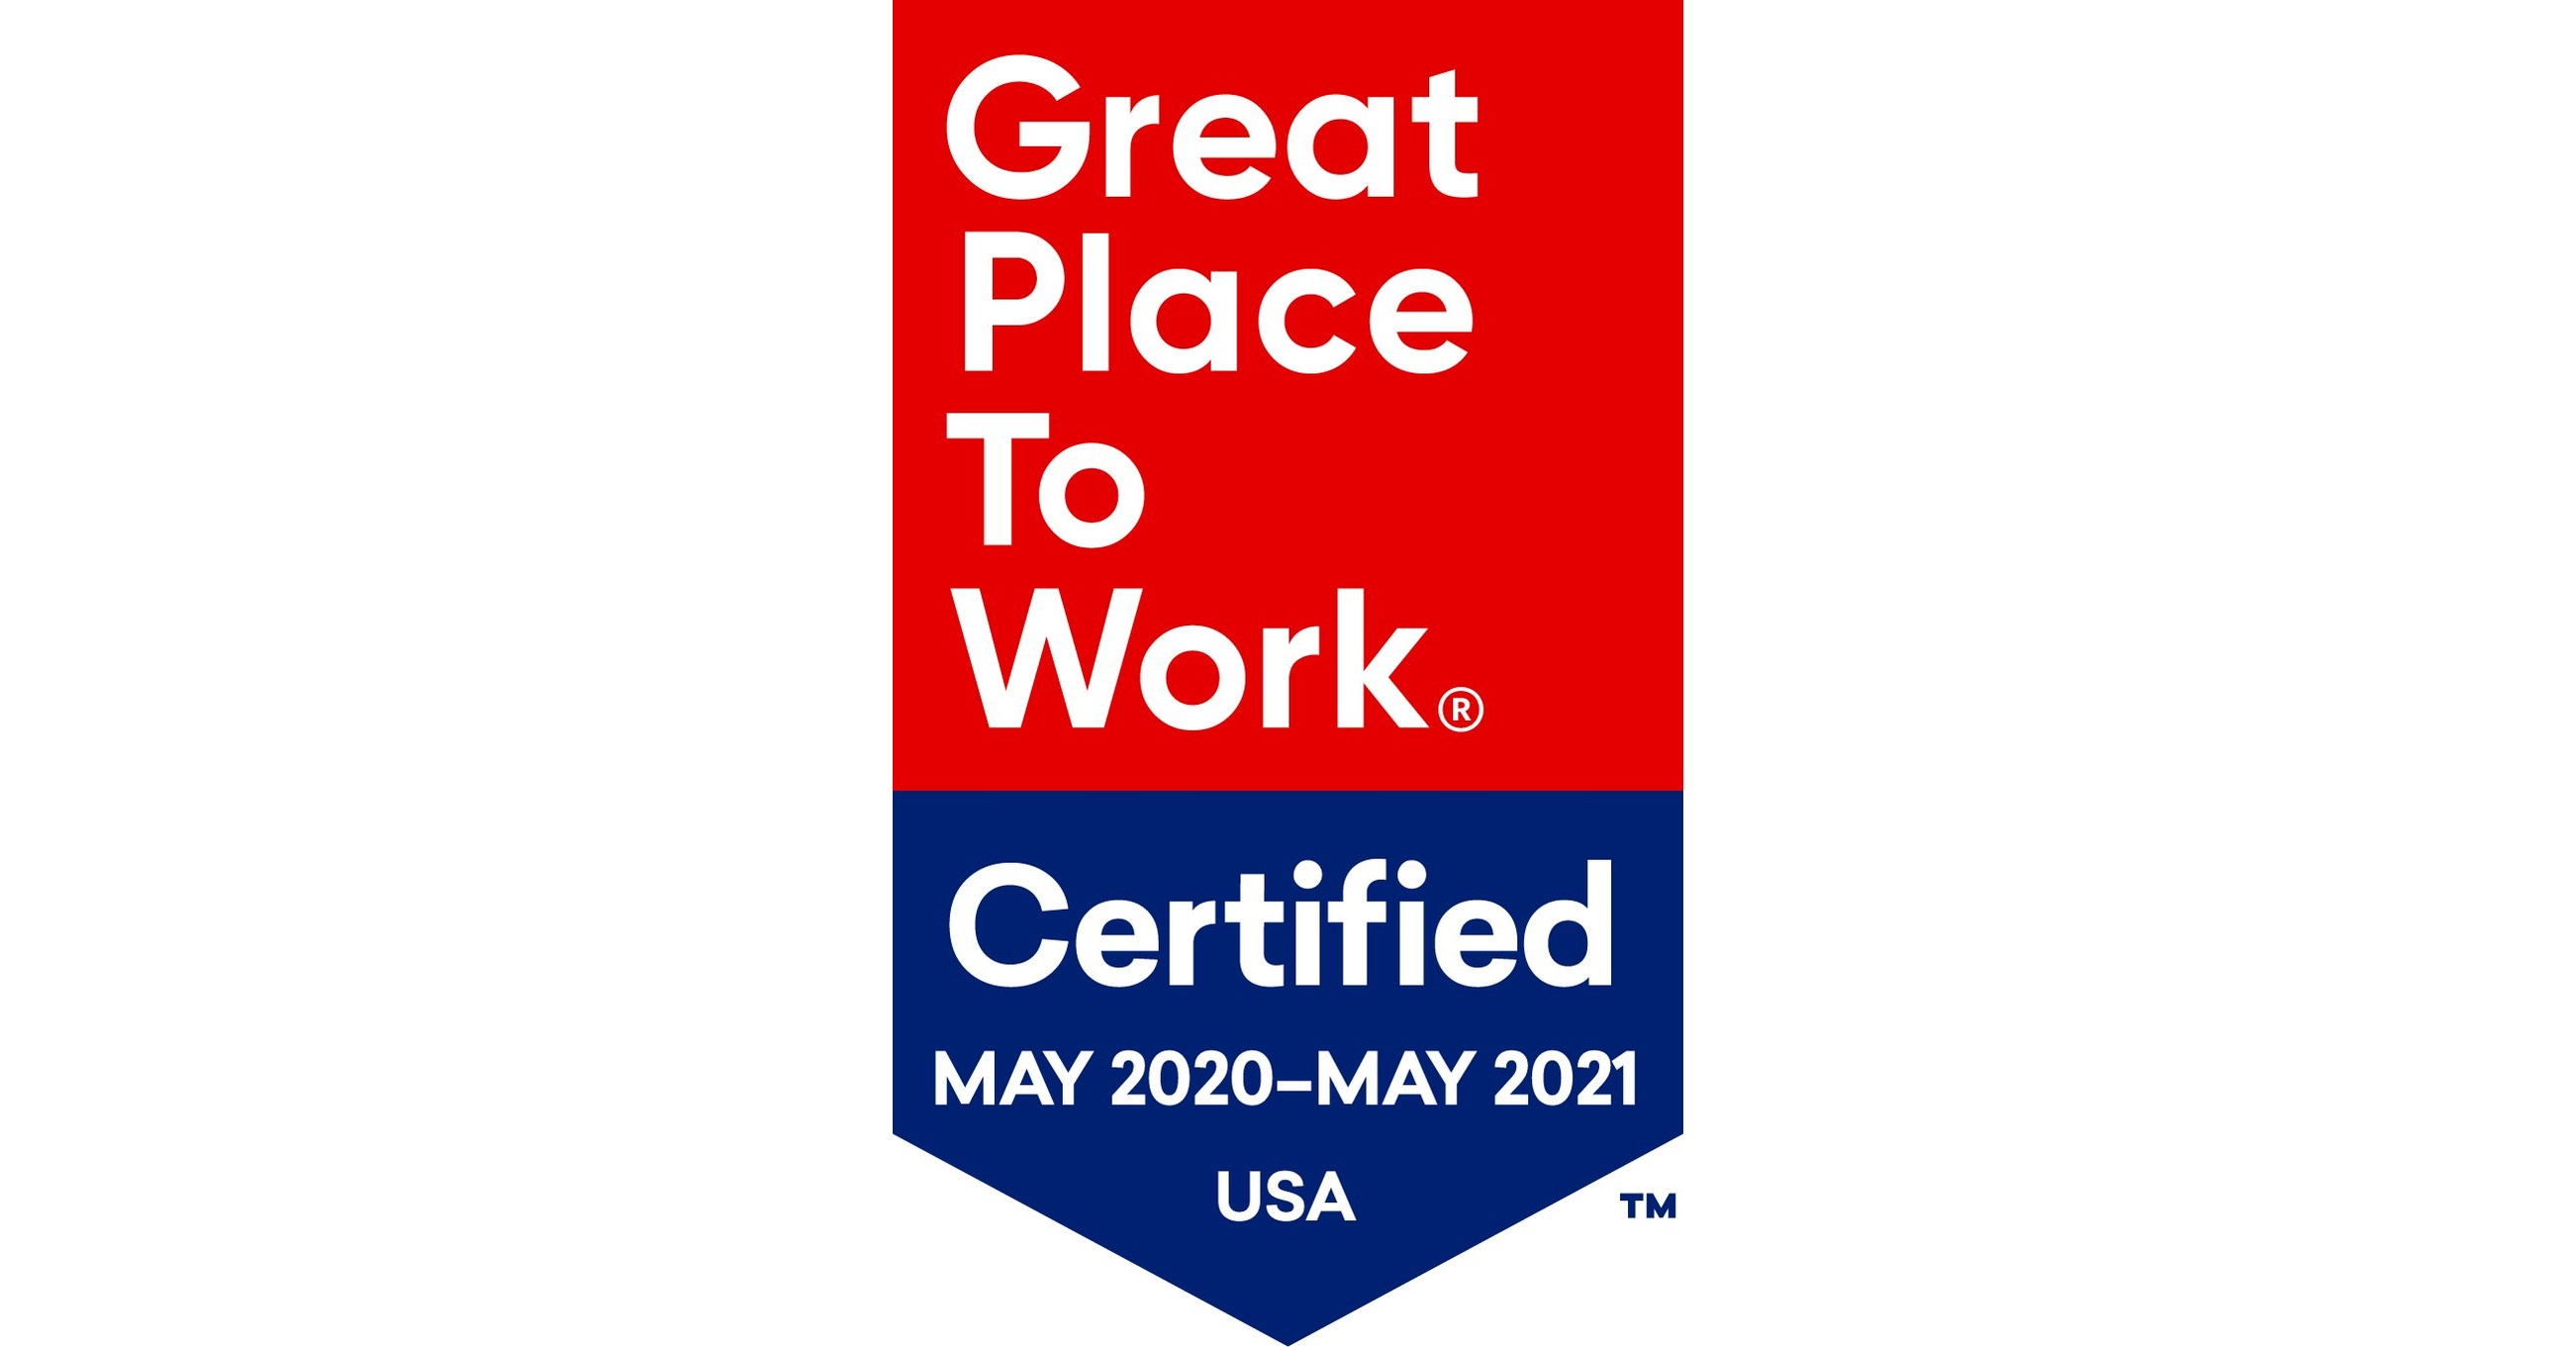 Escoffier Designated A Great Place To Work-Certified™ Company